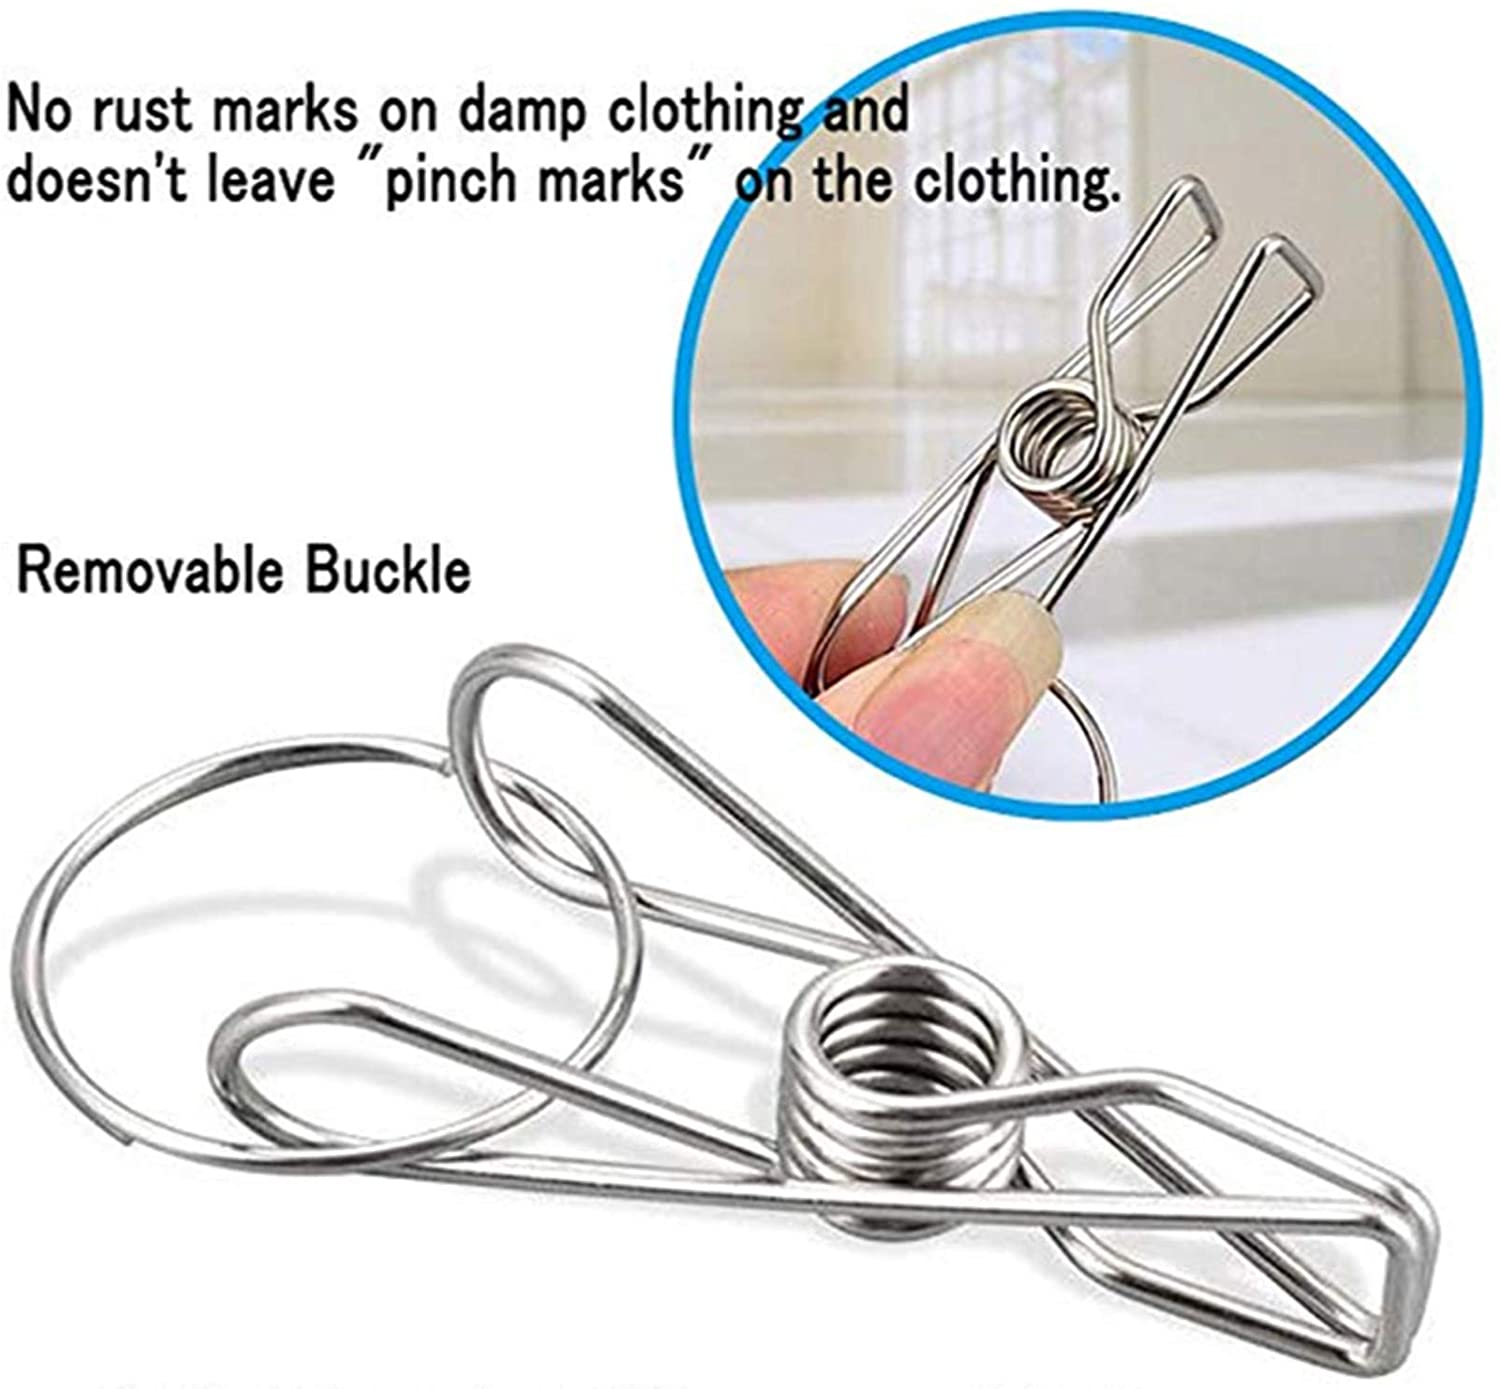 20 Clips Stainless Steel Clothes Drying Hanger, Underwear Socks Clothing Rack Clips